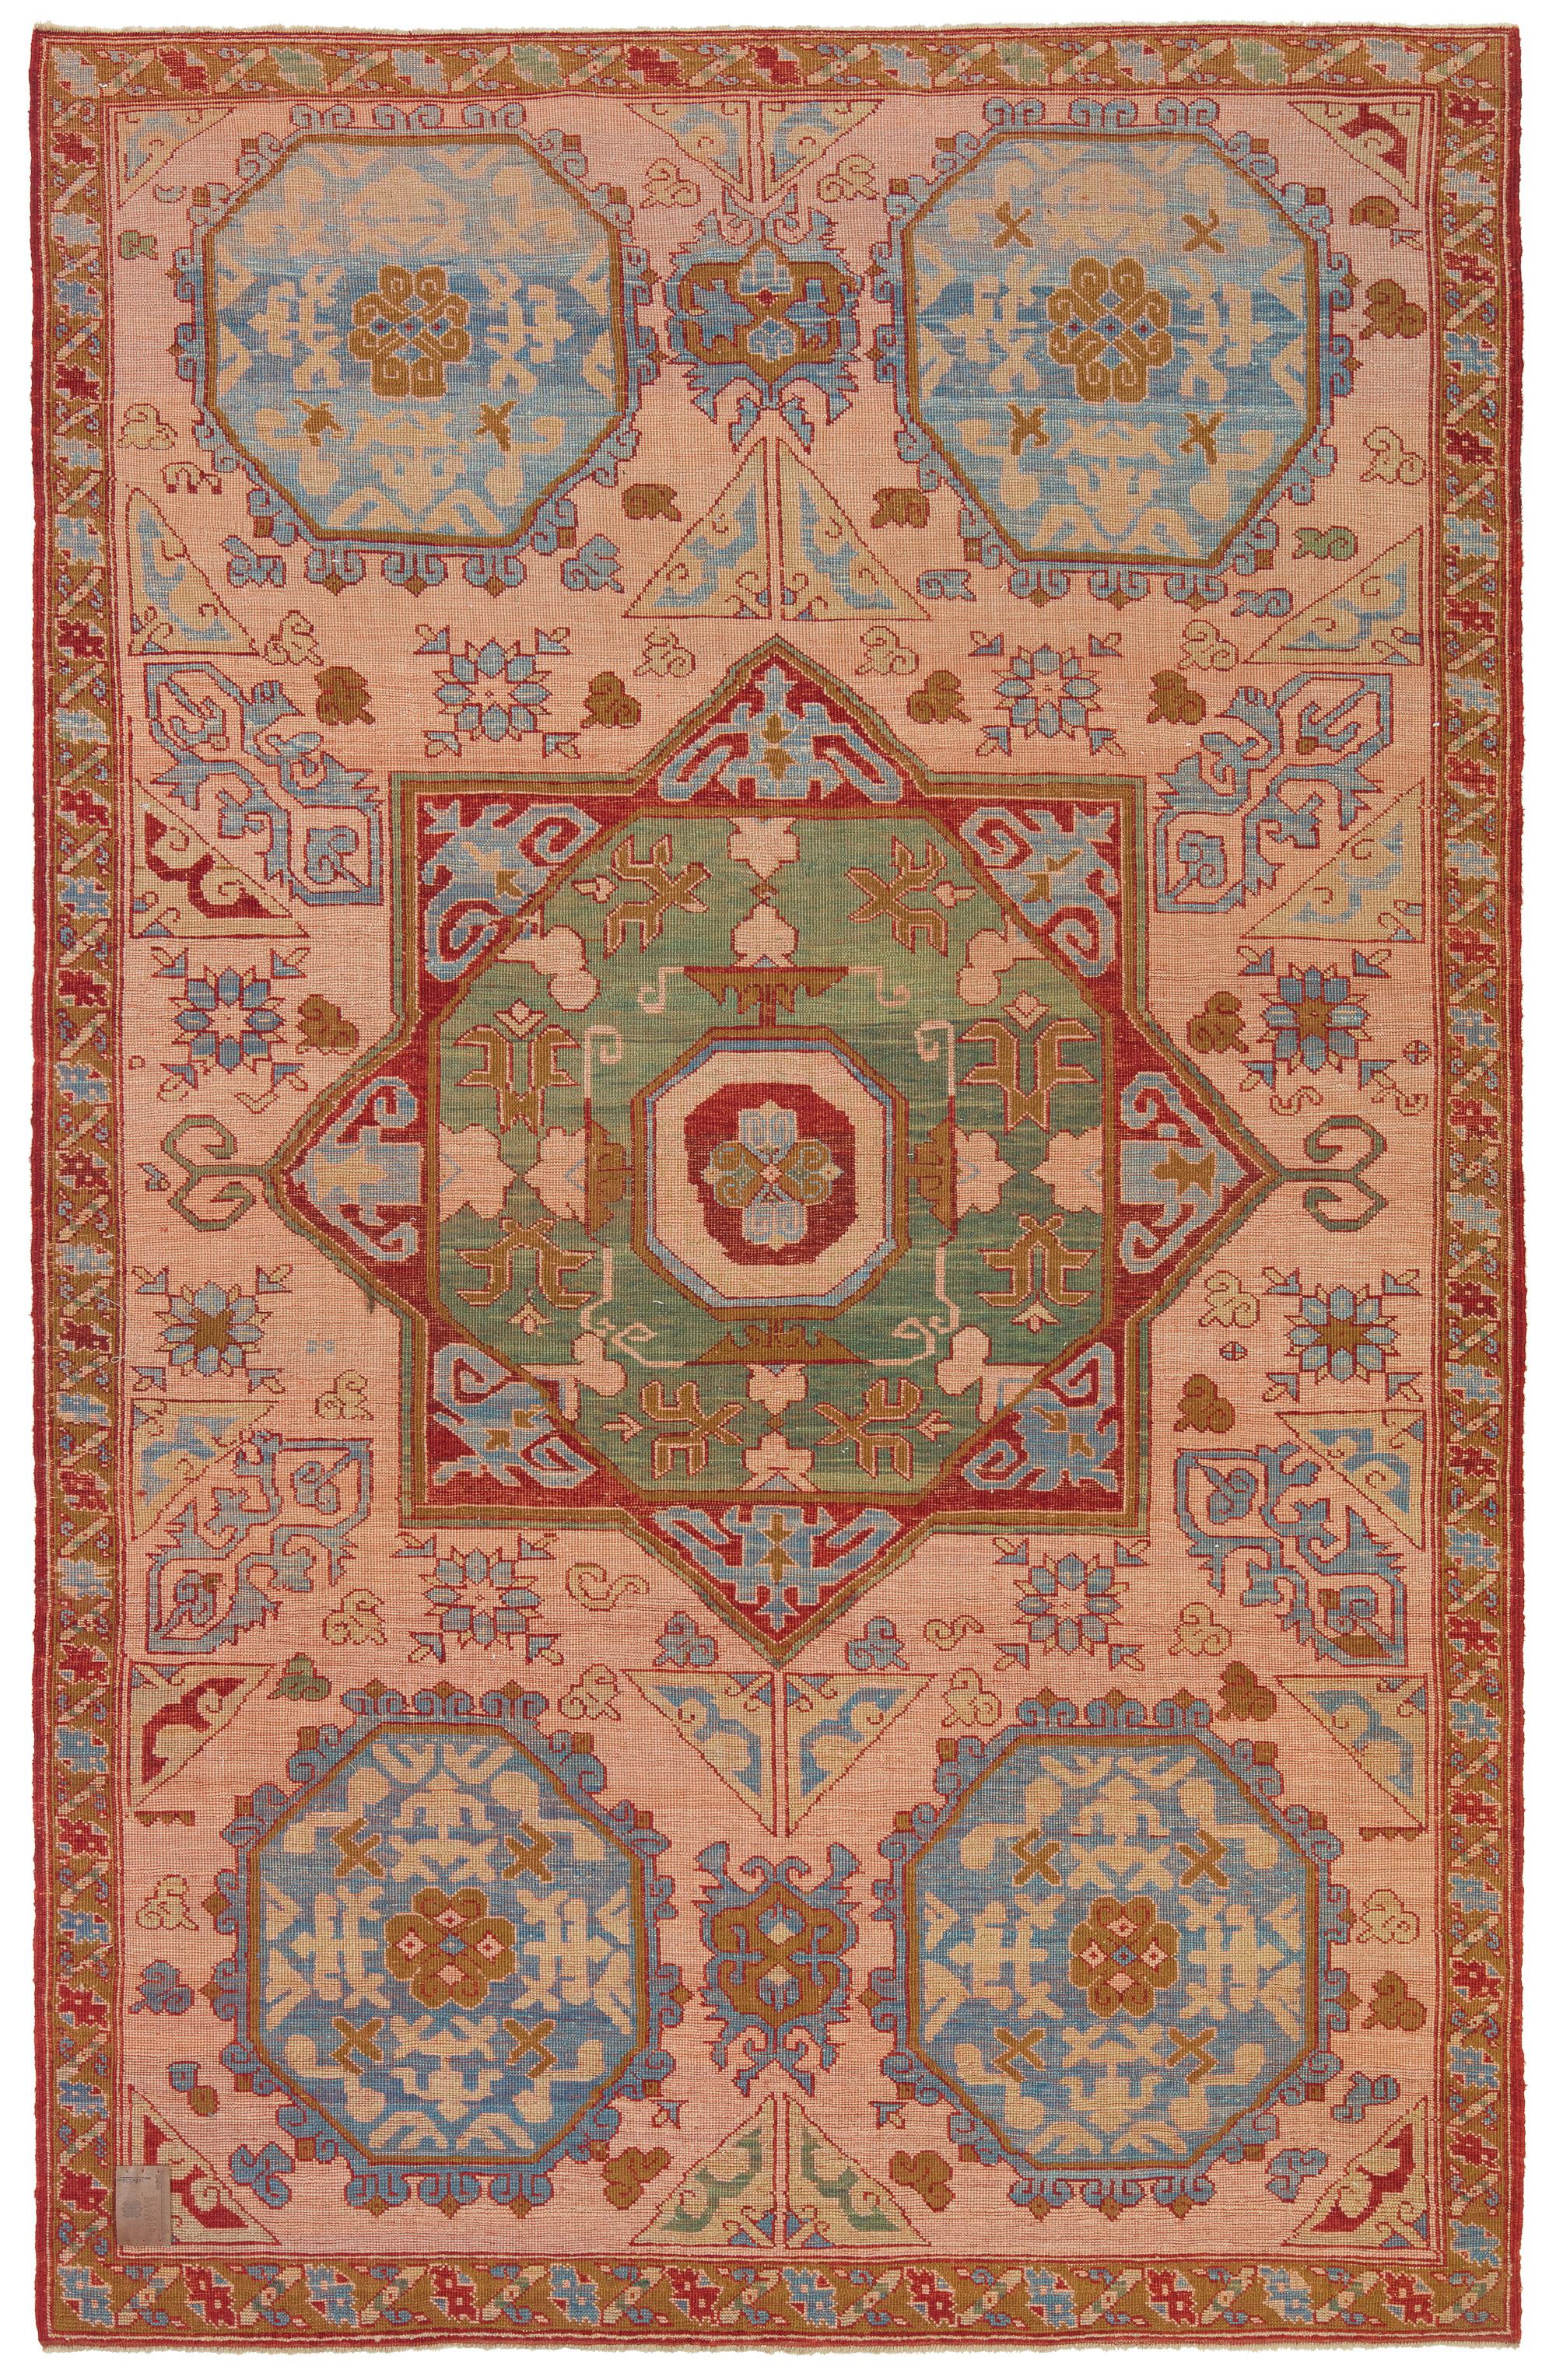 The source of carpet comes from the book Orient Star – A Carpet Collection, E. Heinrich Kirchheim, Hali Publications Ltd, 1993 nr.161. This exceptionally elegant and unusual central octagon figure is enclosed by an eight-pointed star-design